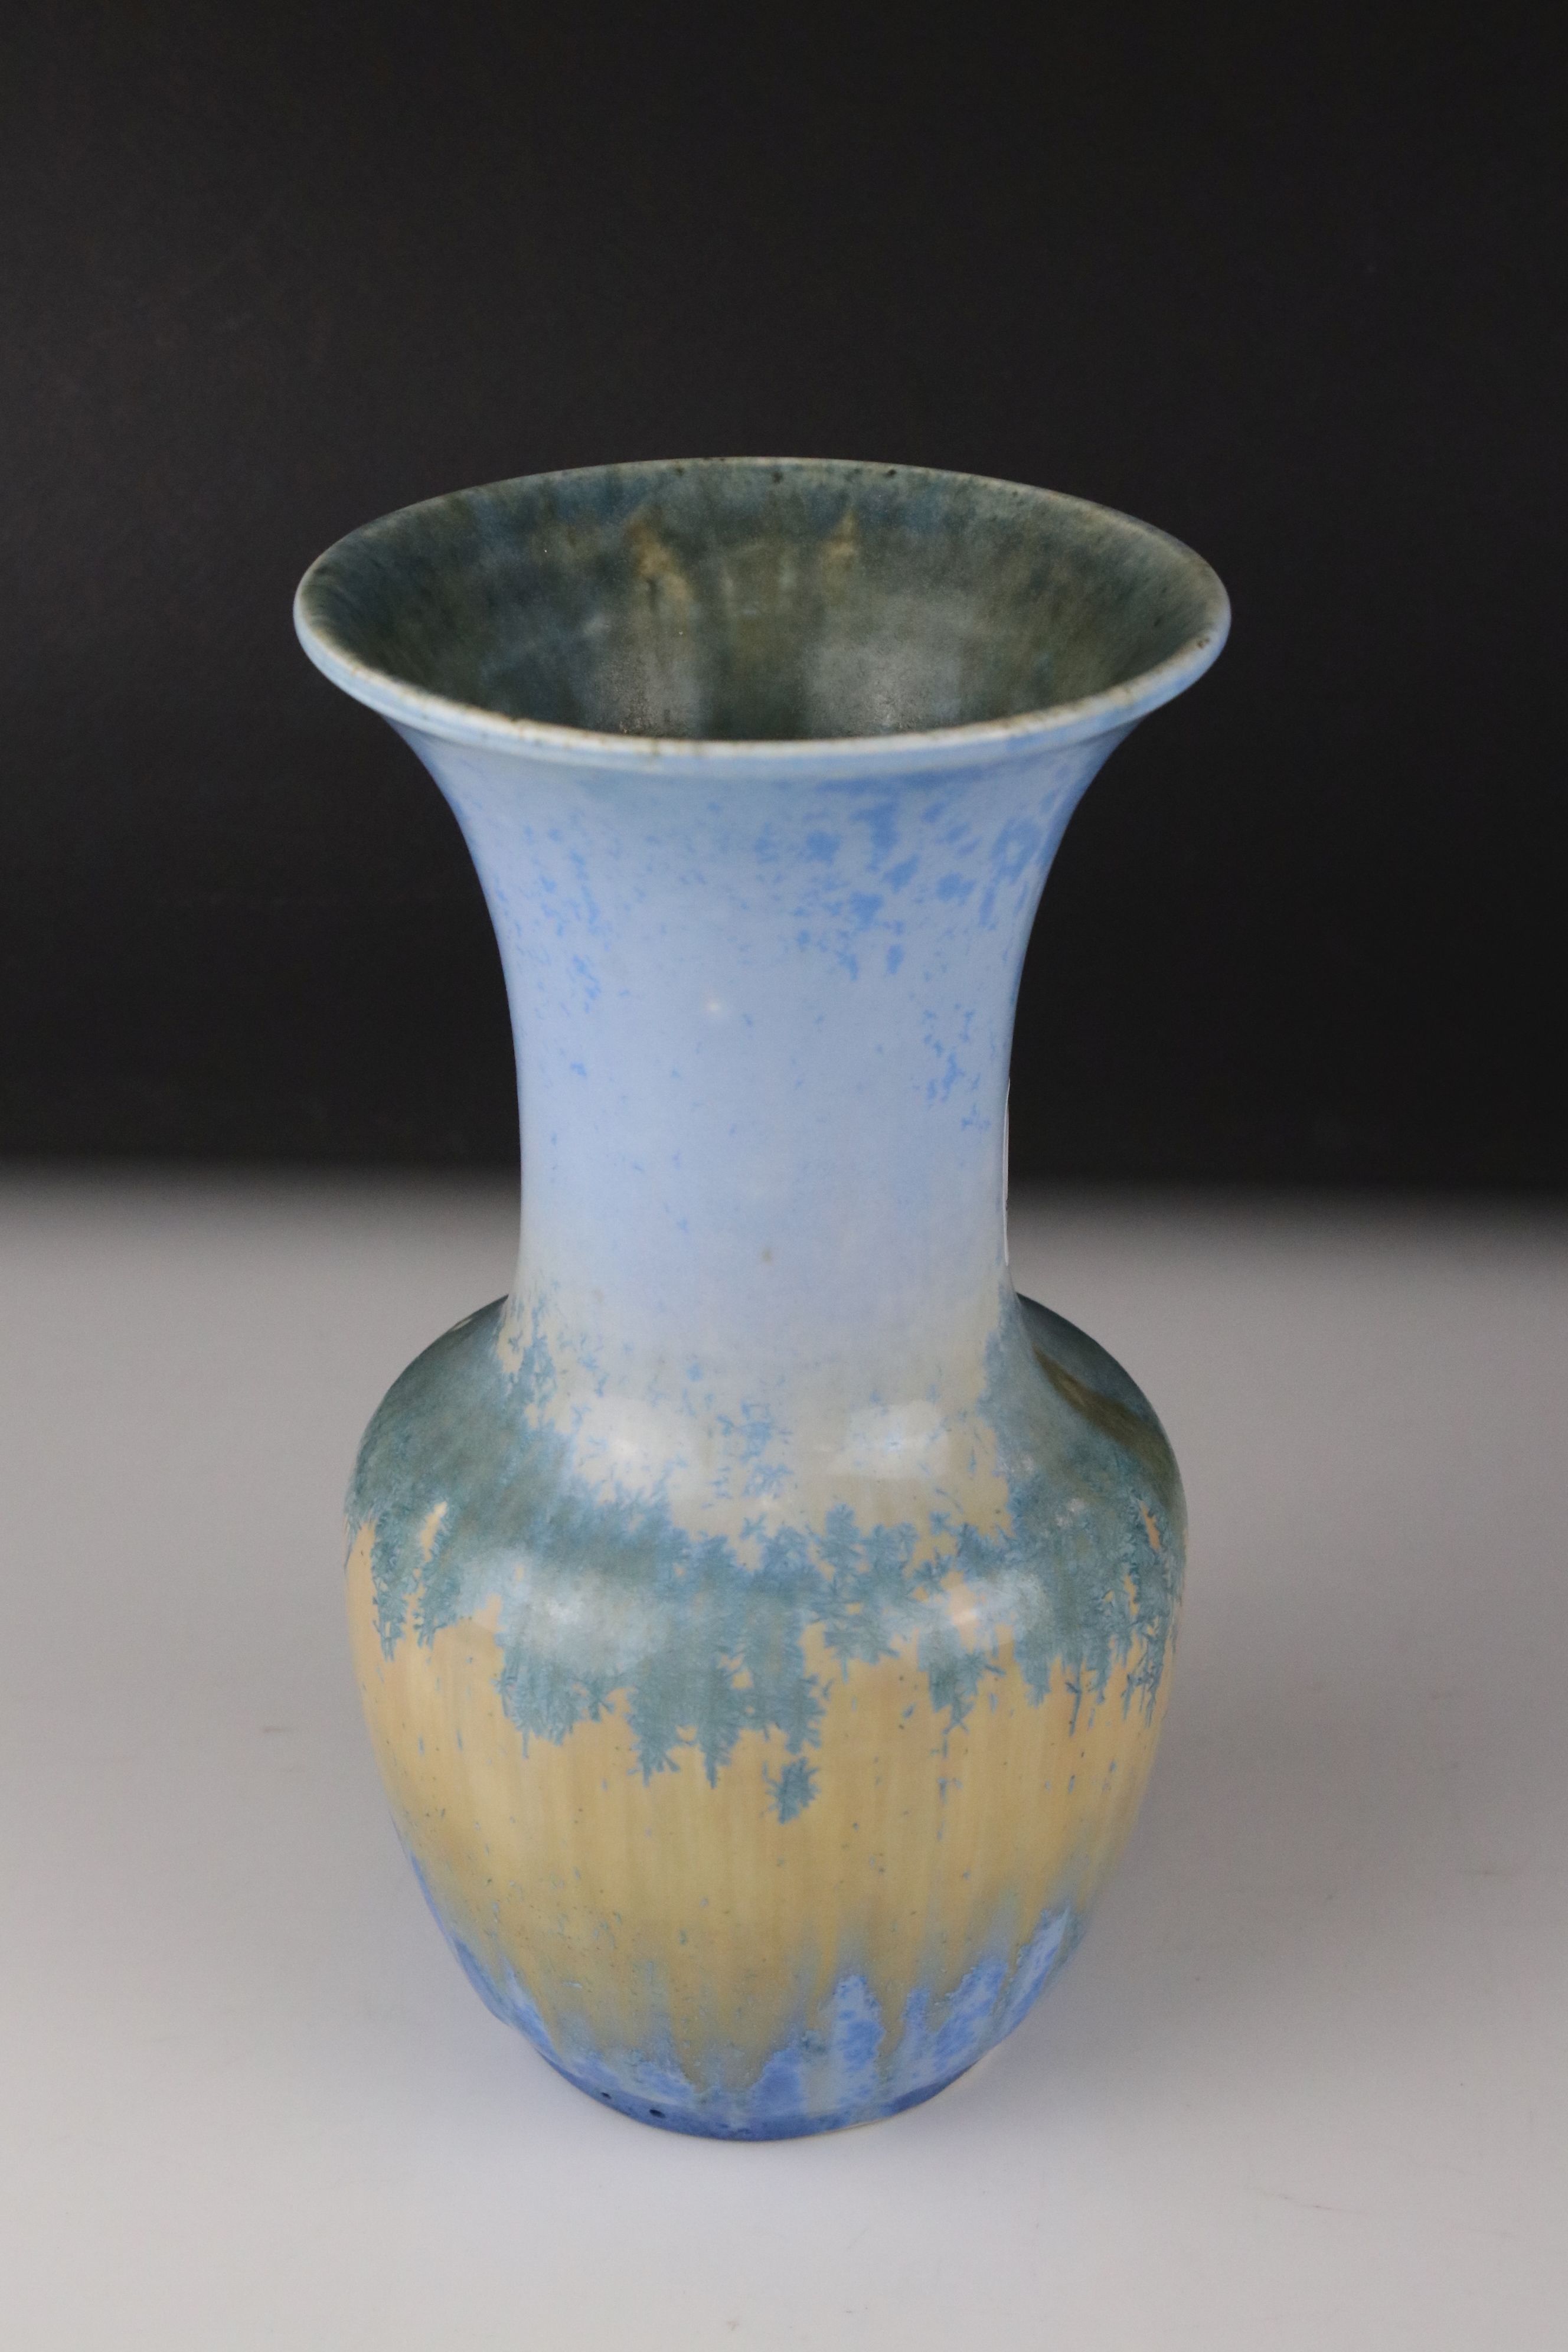 A 20th century Ruskin pottery trumpet shaped vase Crystalline Decoration impressed mark and 1932, 20 - Image 2 of 5